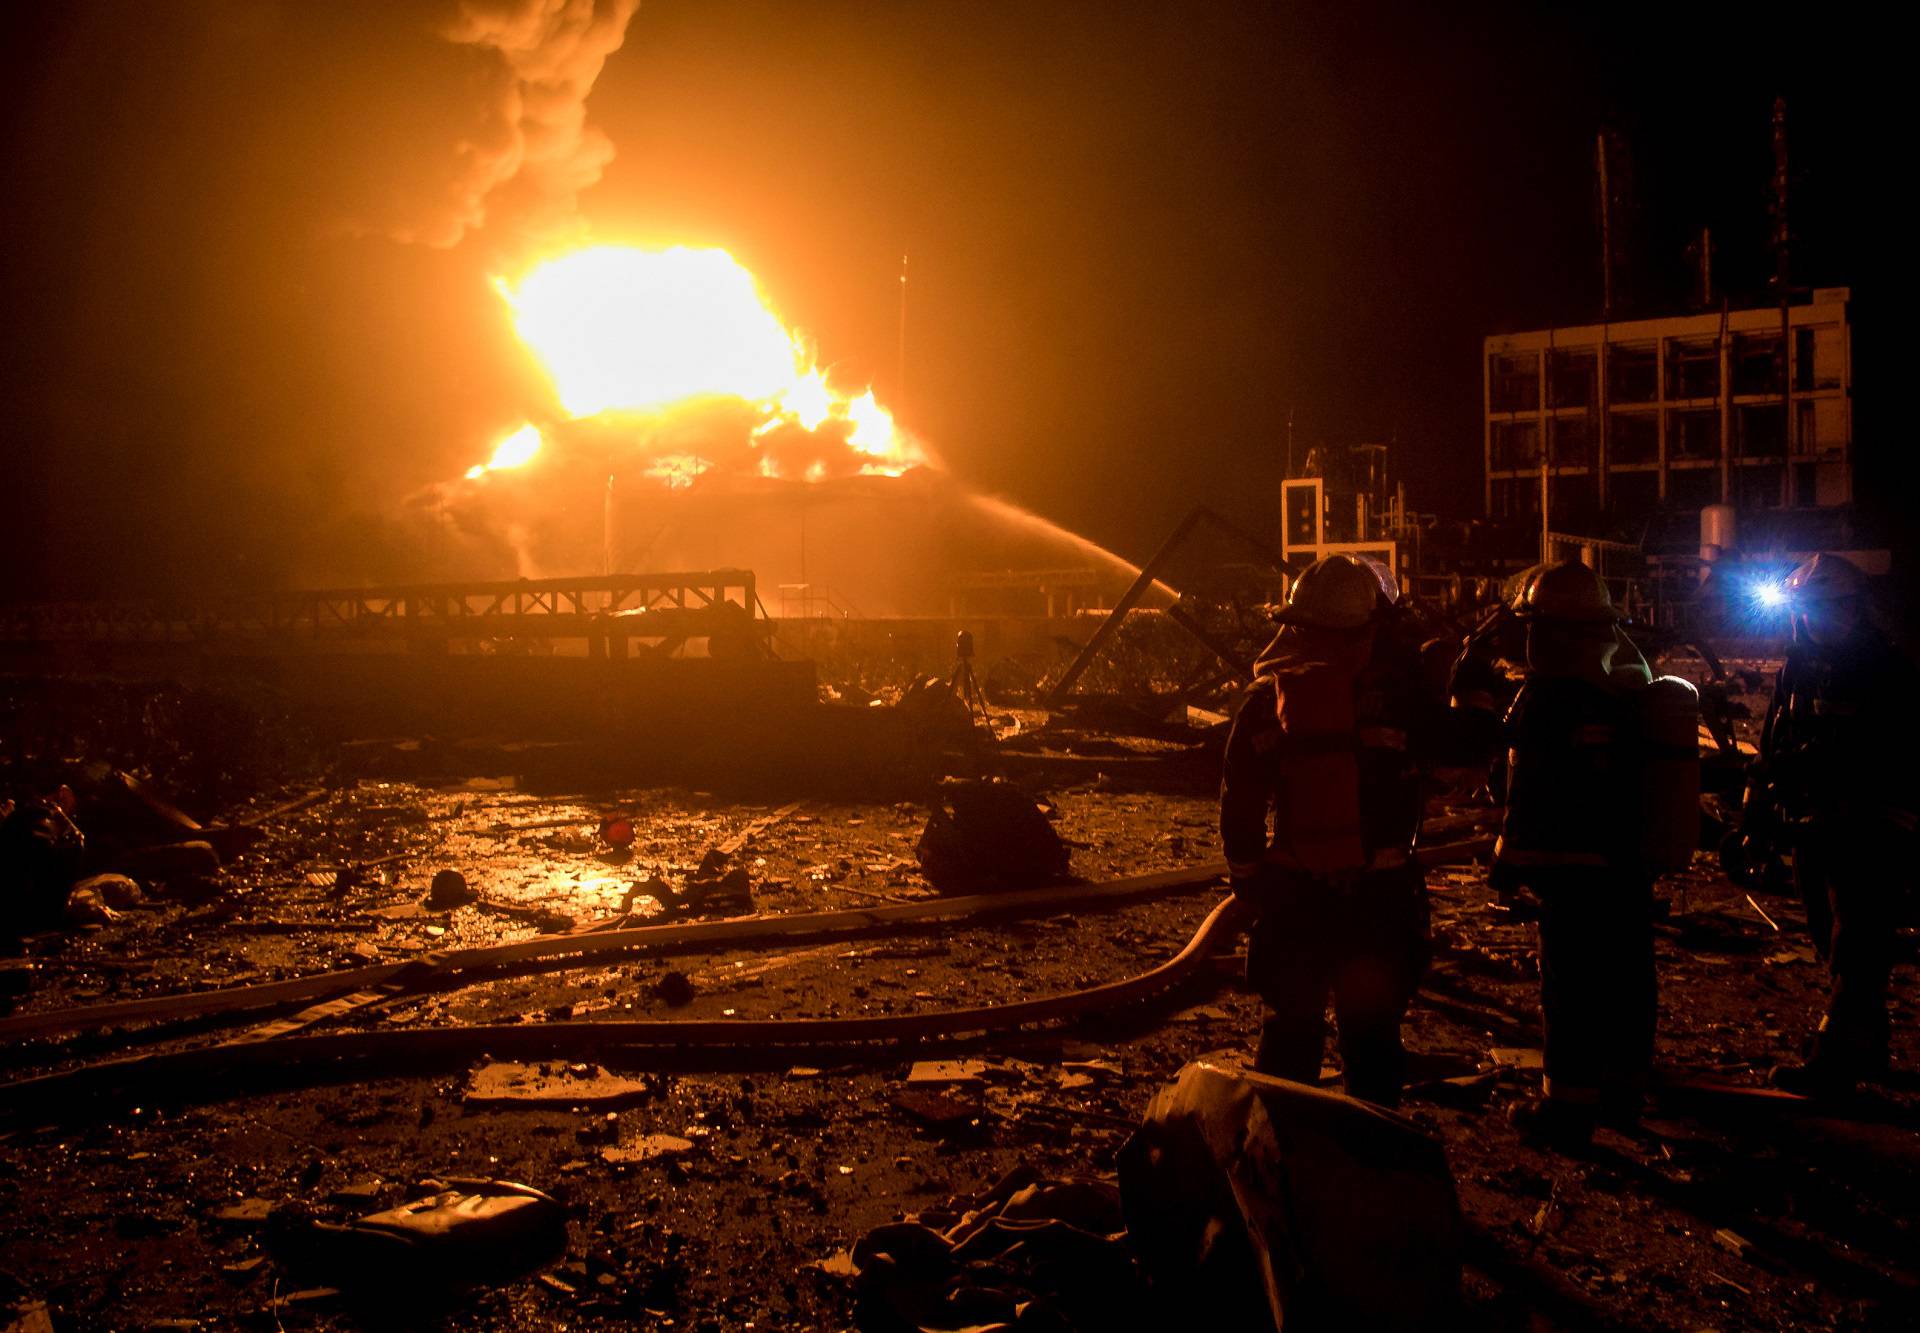 Firefighters work on extinguishing the fire following an explosion at the pesticide plant owned by Tianjiayi Chemical, in Xiangshui